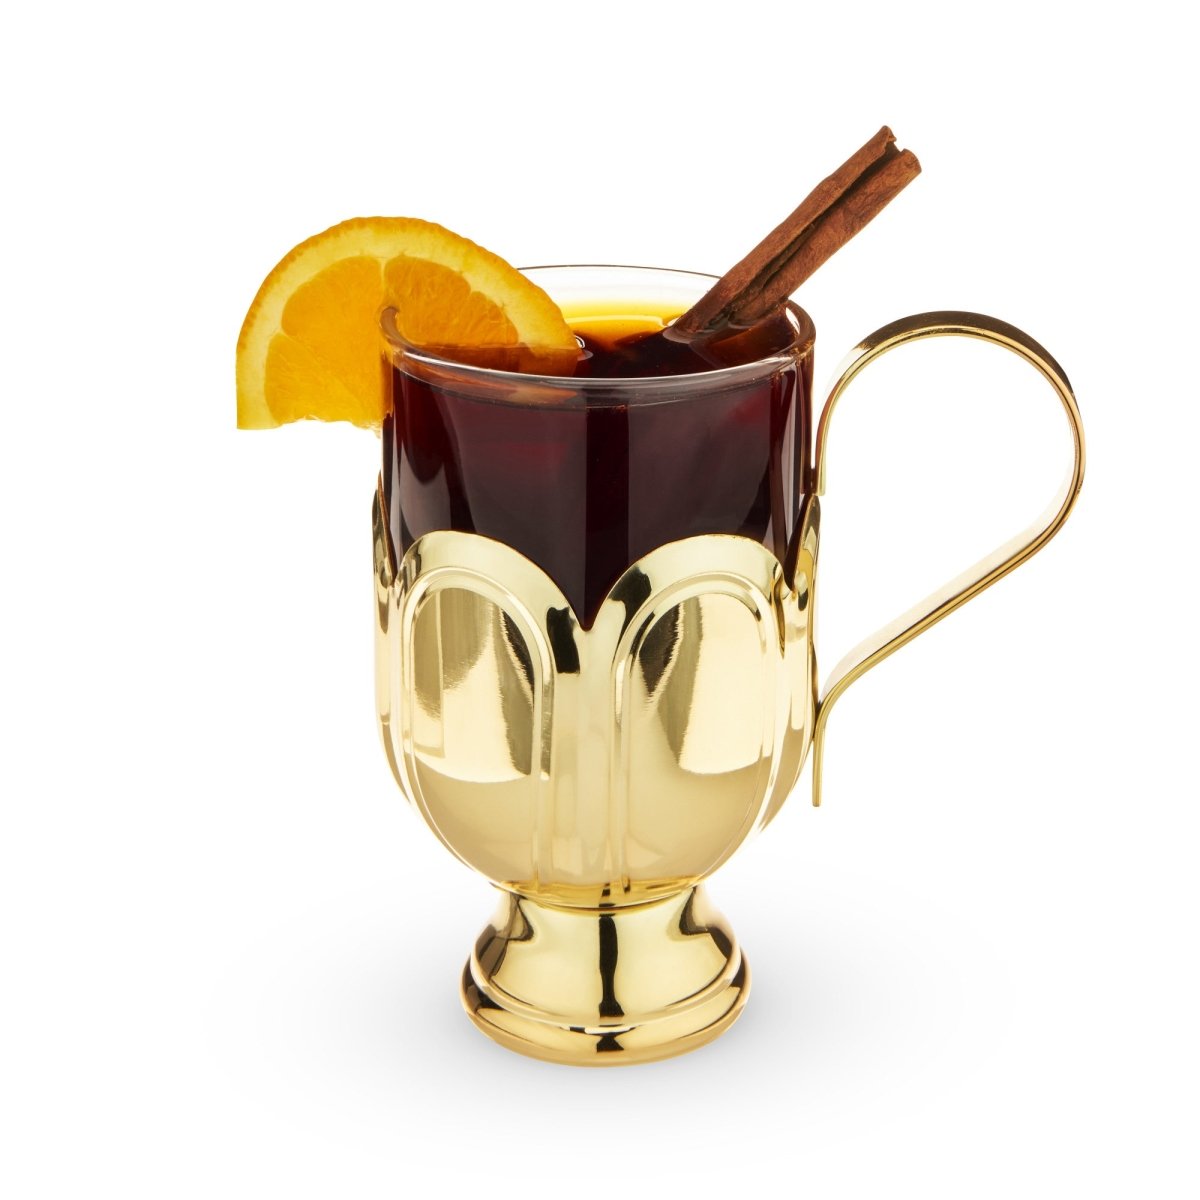 https://cdn.shopify.com/s/files/1/0275/1876/3088/products/gilded-mulled-wine-glass-946397_1445x.jpg?v=1666388924